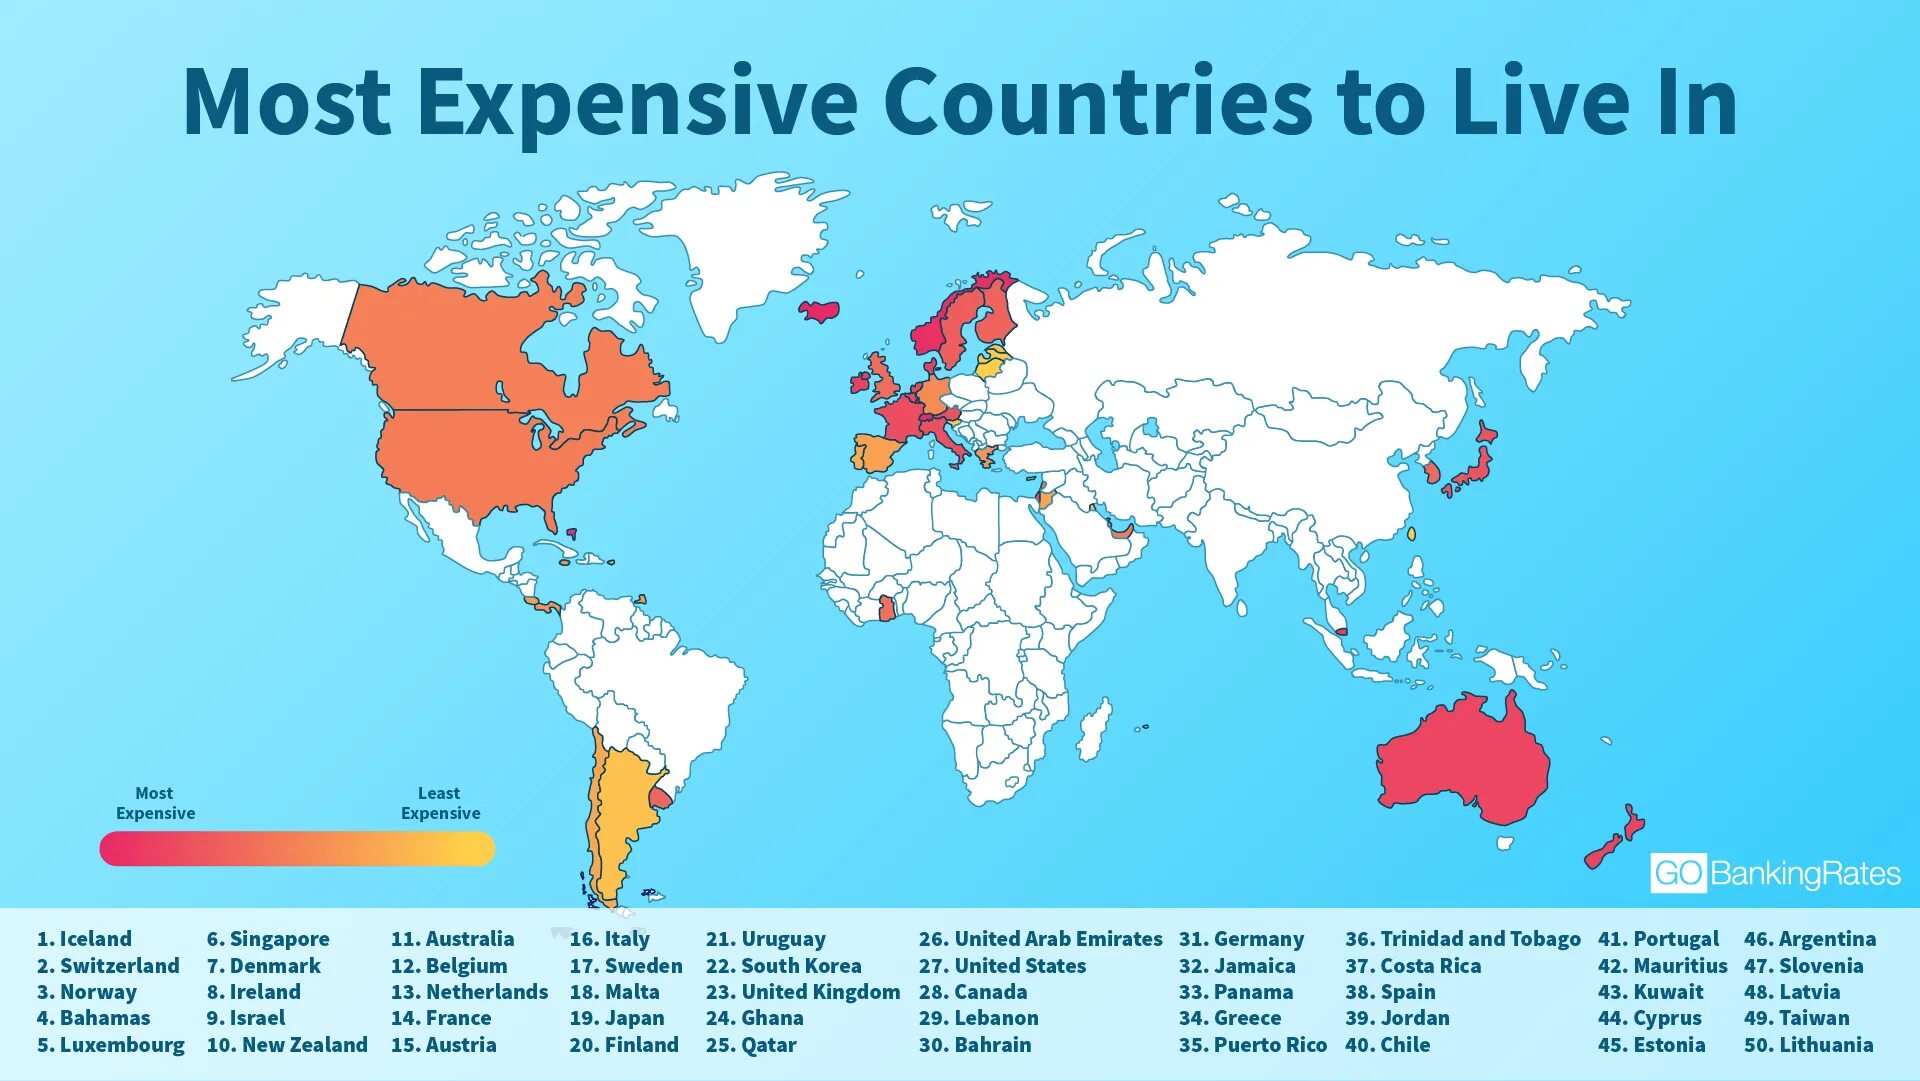 50 Expensive Countries. Expensive more expensive. The most expensive thing in the World. The most expensive. Live expensive